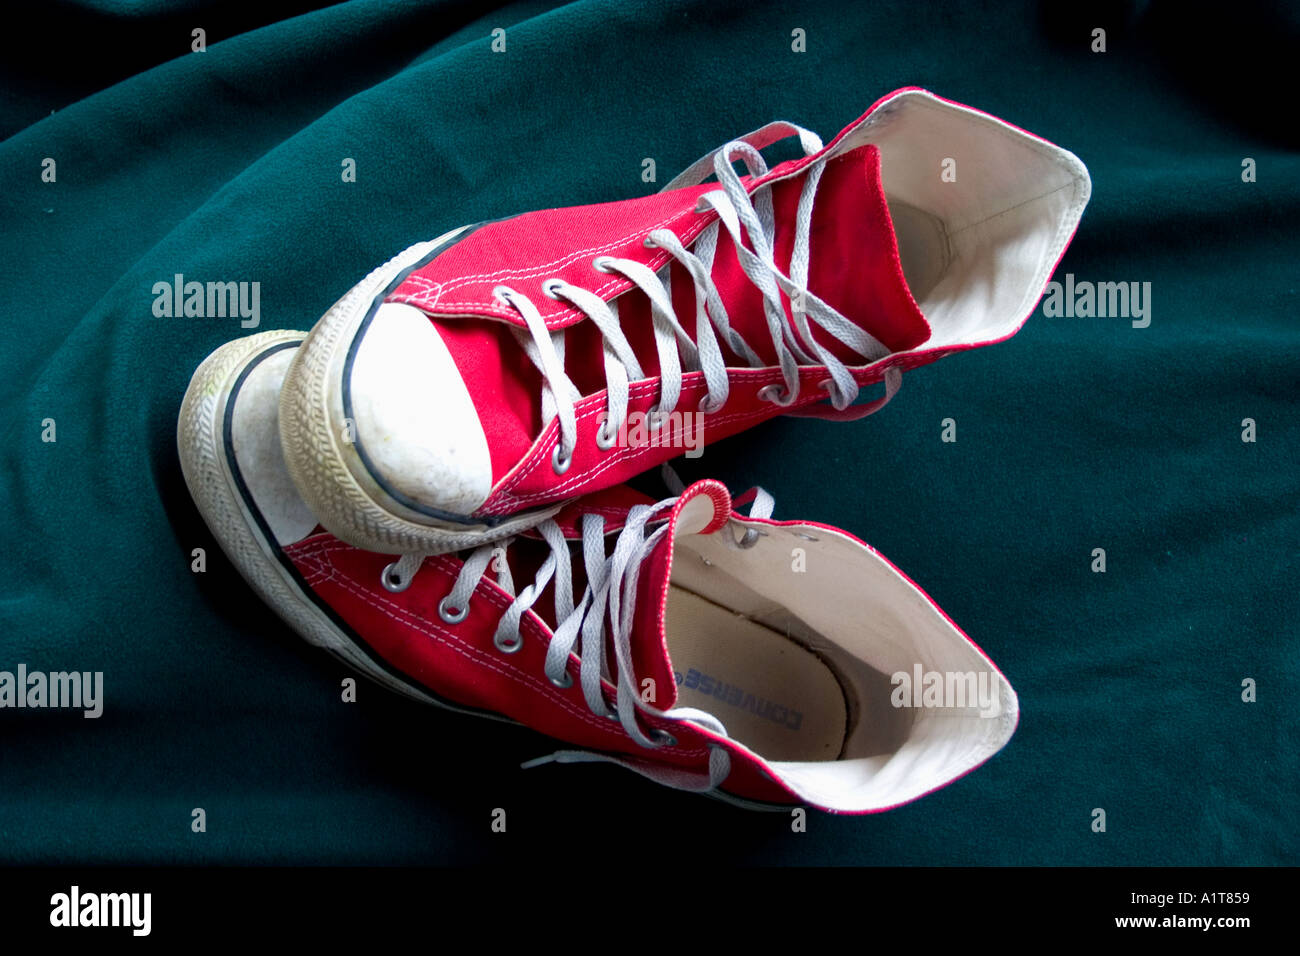 red chuck taylor high tops